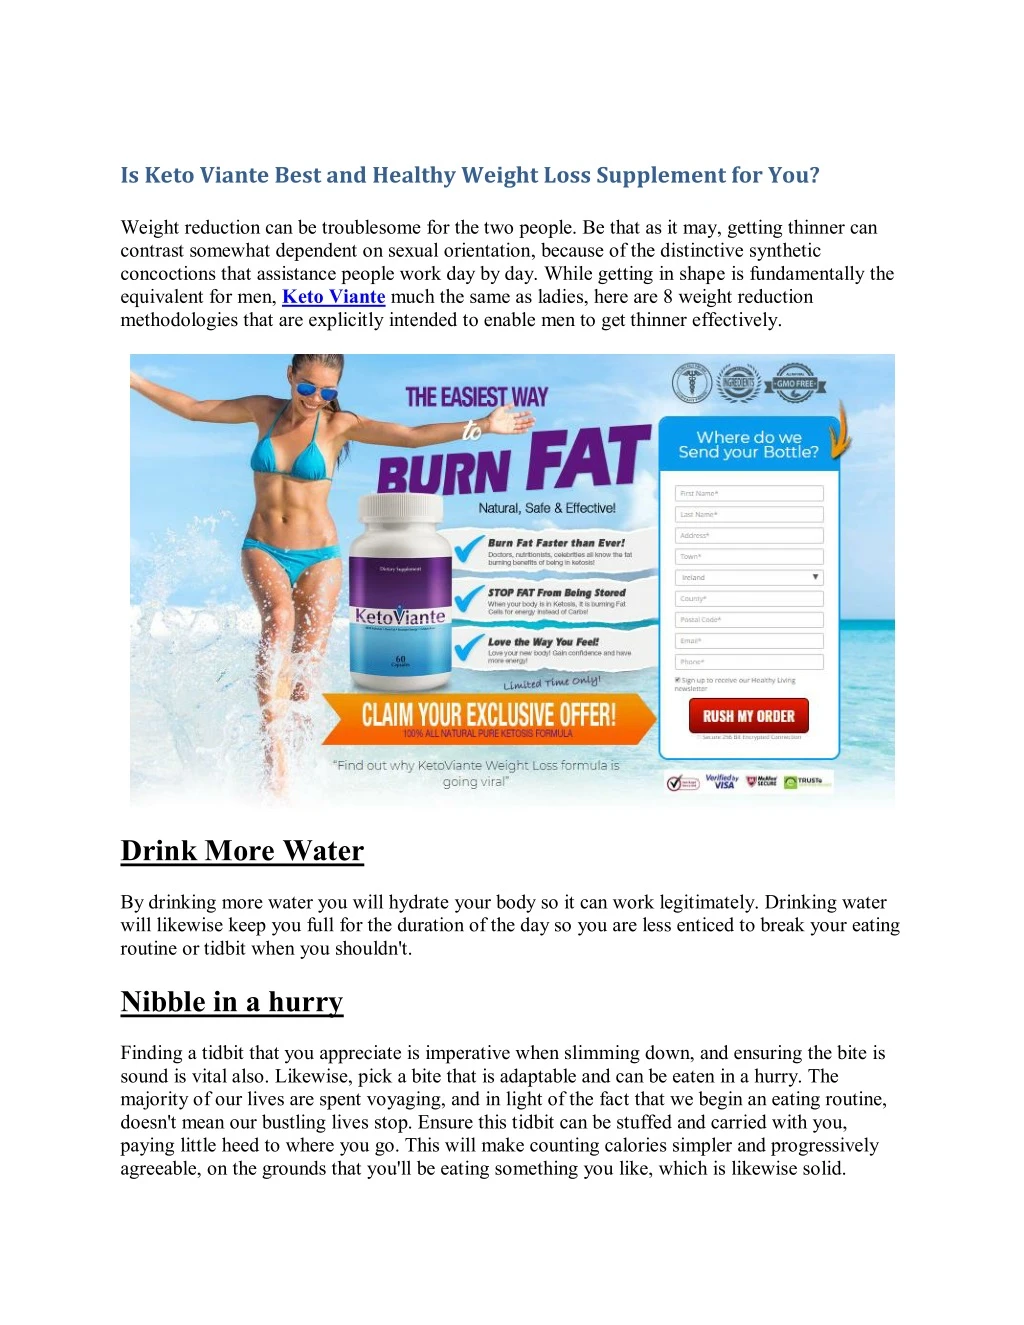 is keto viante best and healthy weight loss